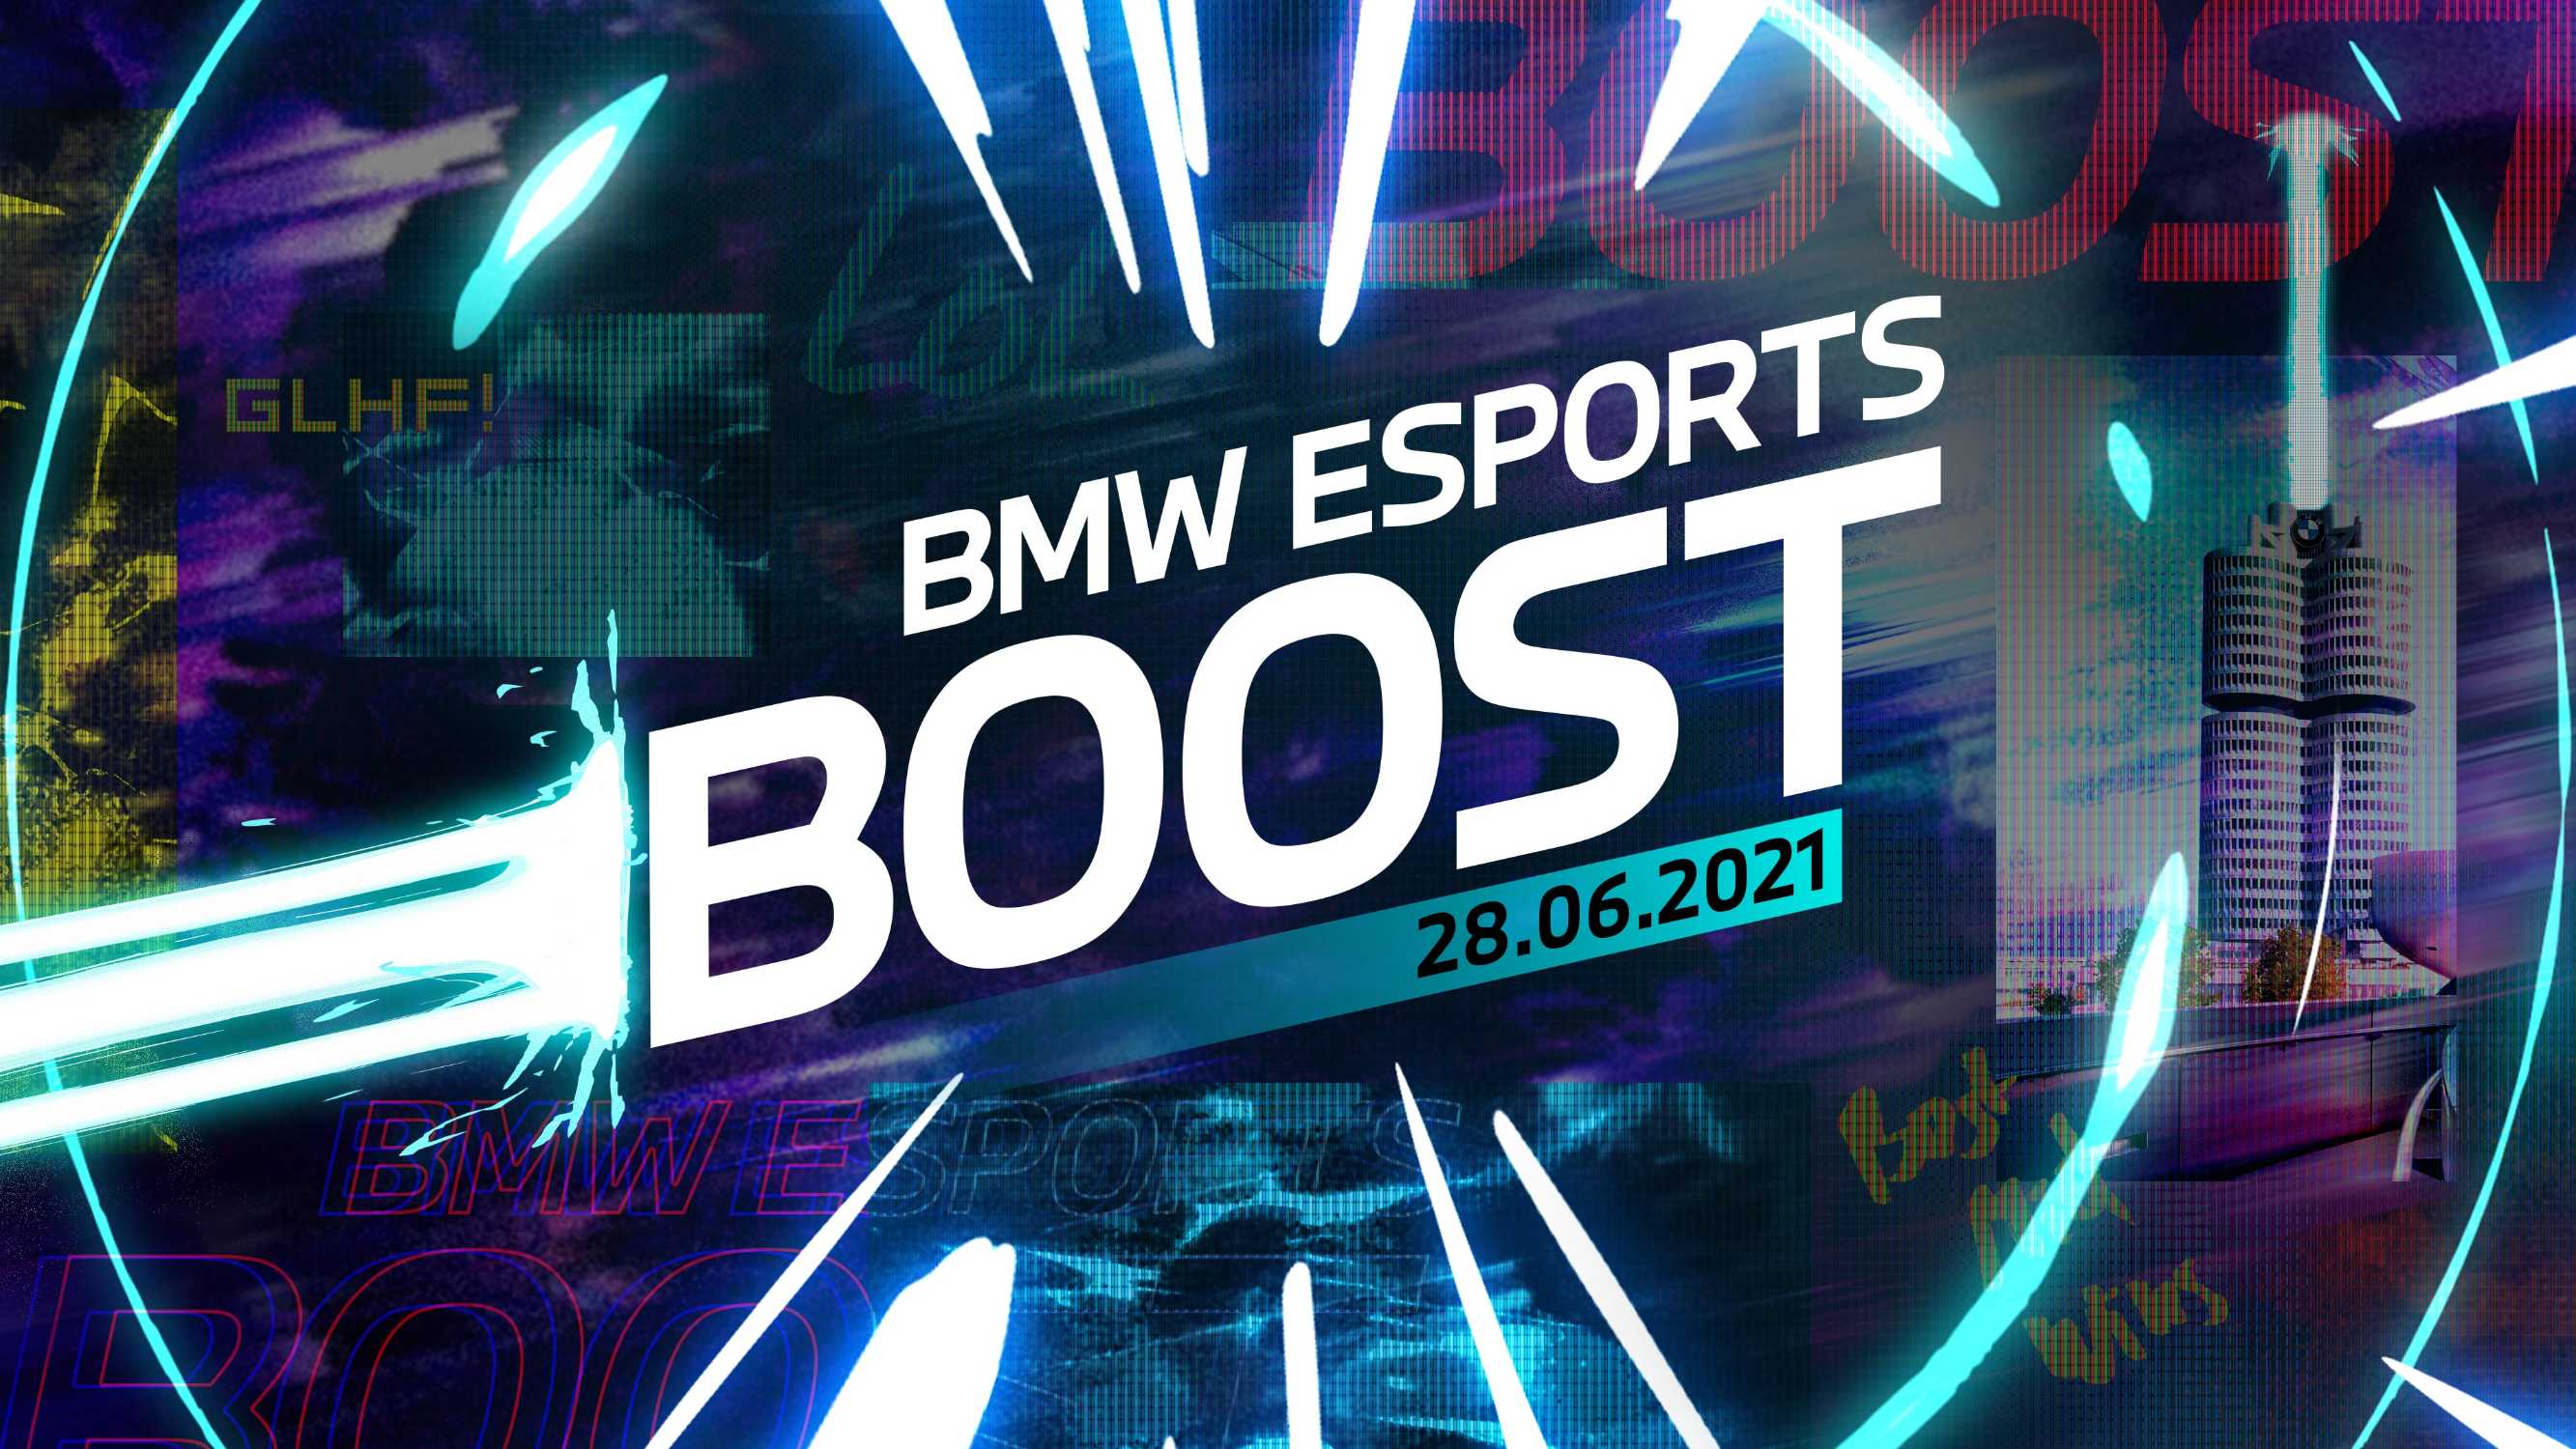 BMW Esports Boost 2021” a new event for the esports sector live from BMW Welt.